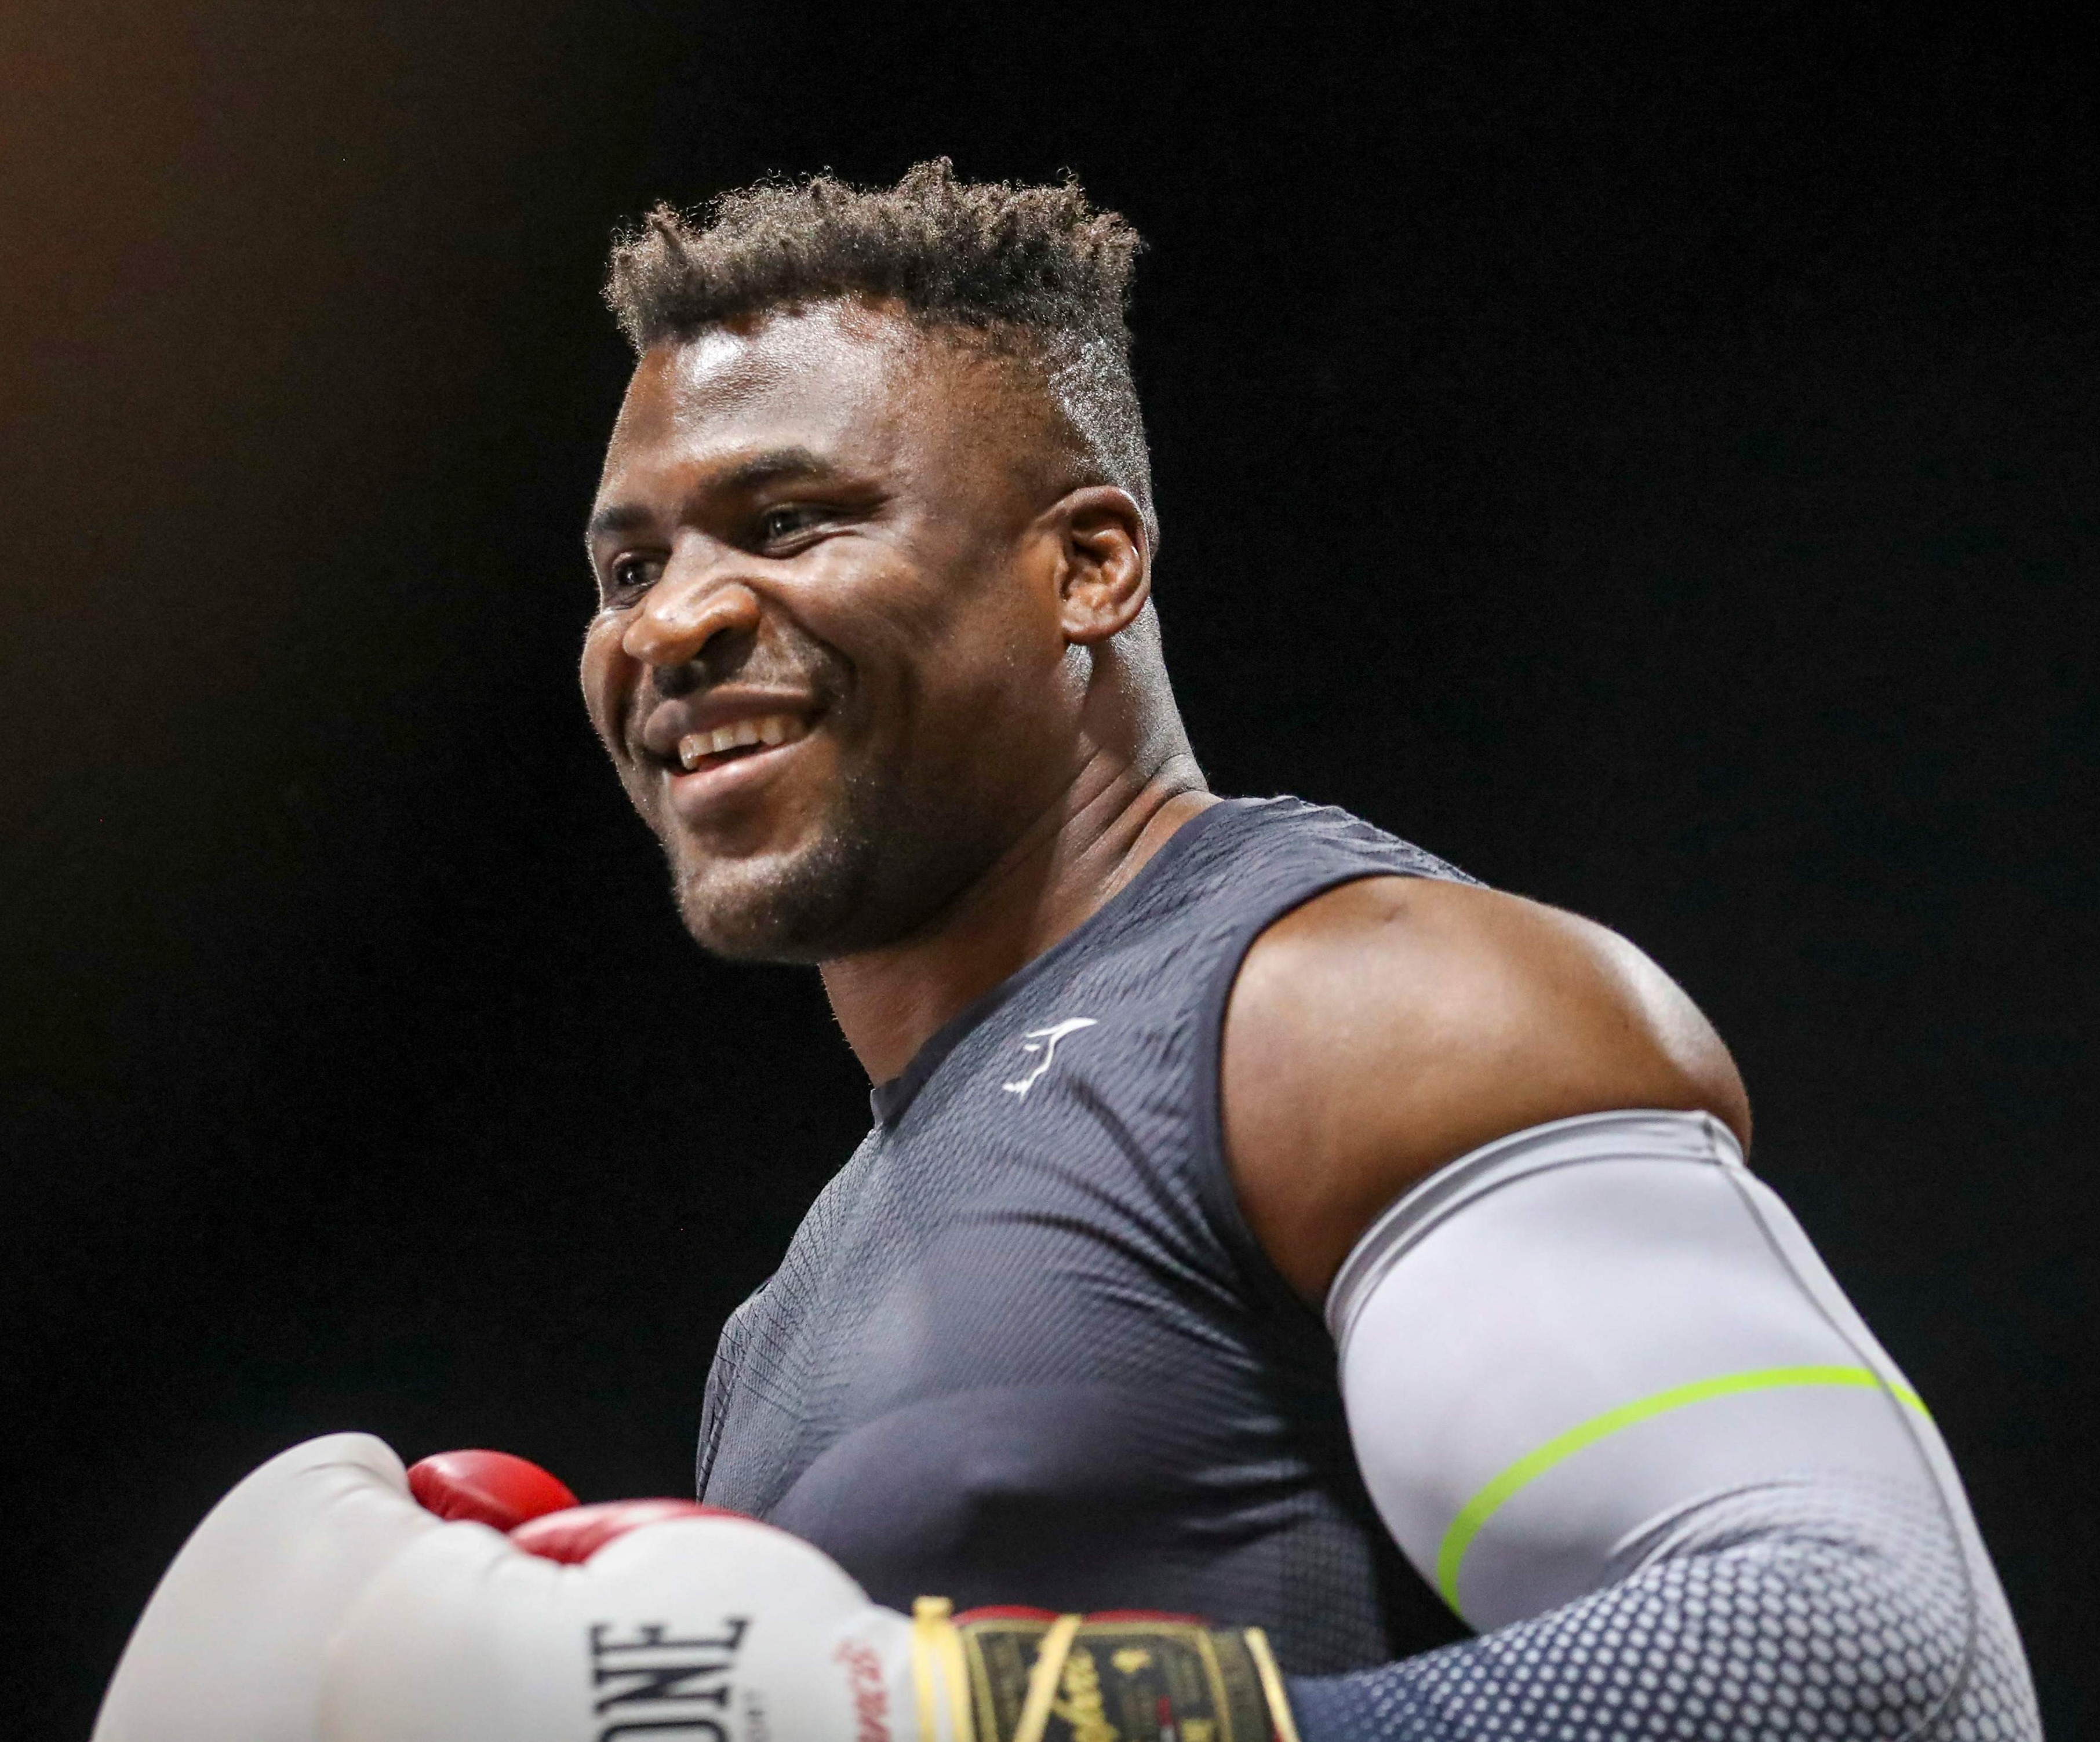 Rising star Francis Ngannou has earned big sums since moving away from UFC